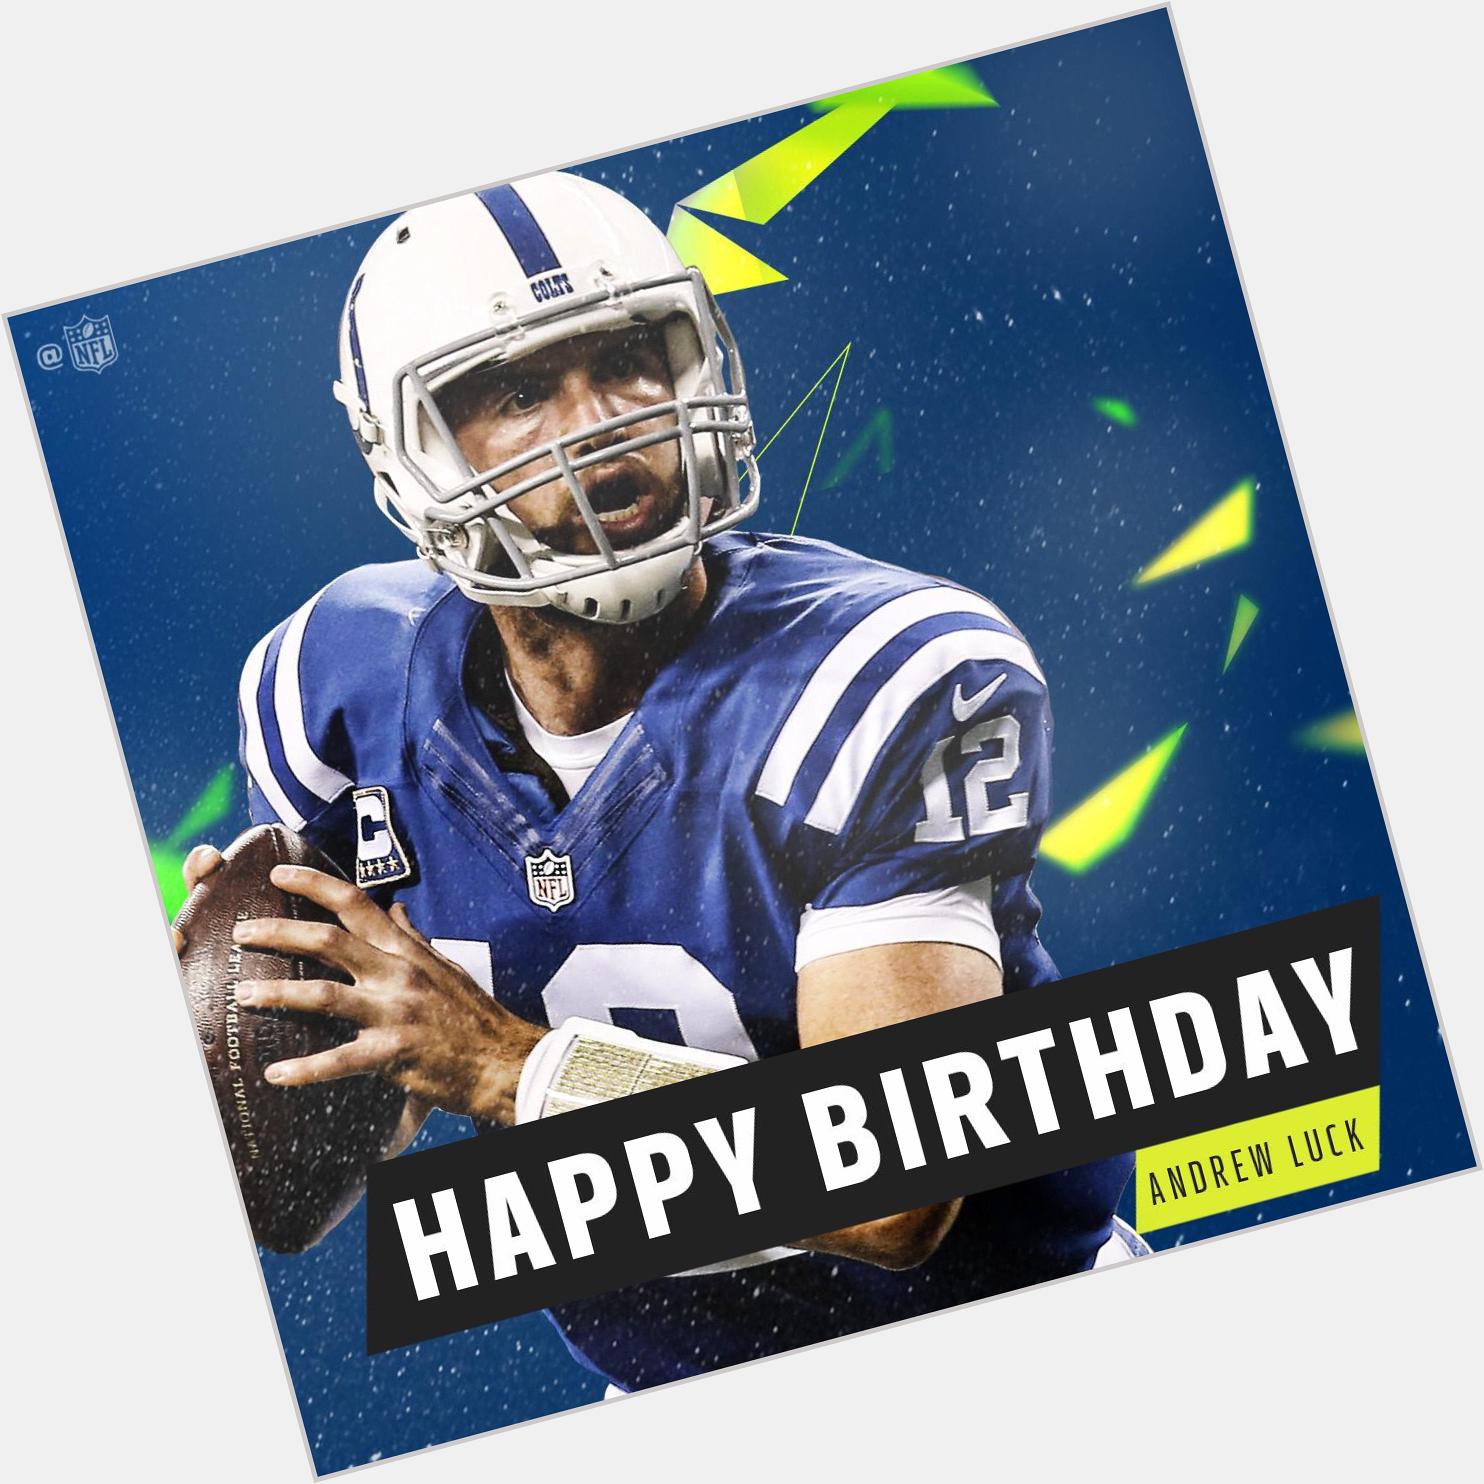 Lets all wish Andrew Luck a HAPPY birthday!   